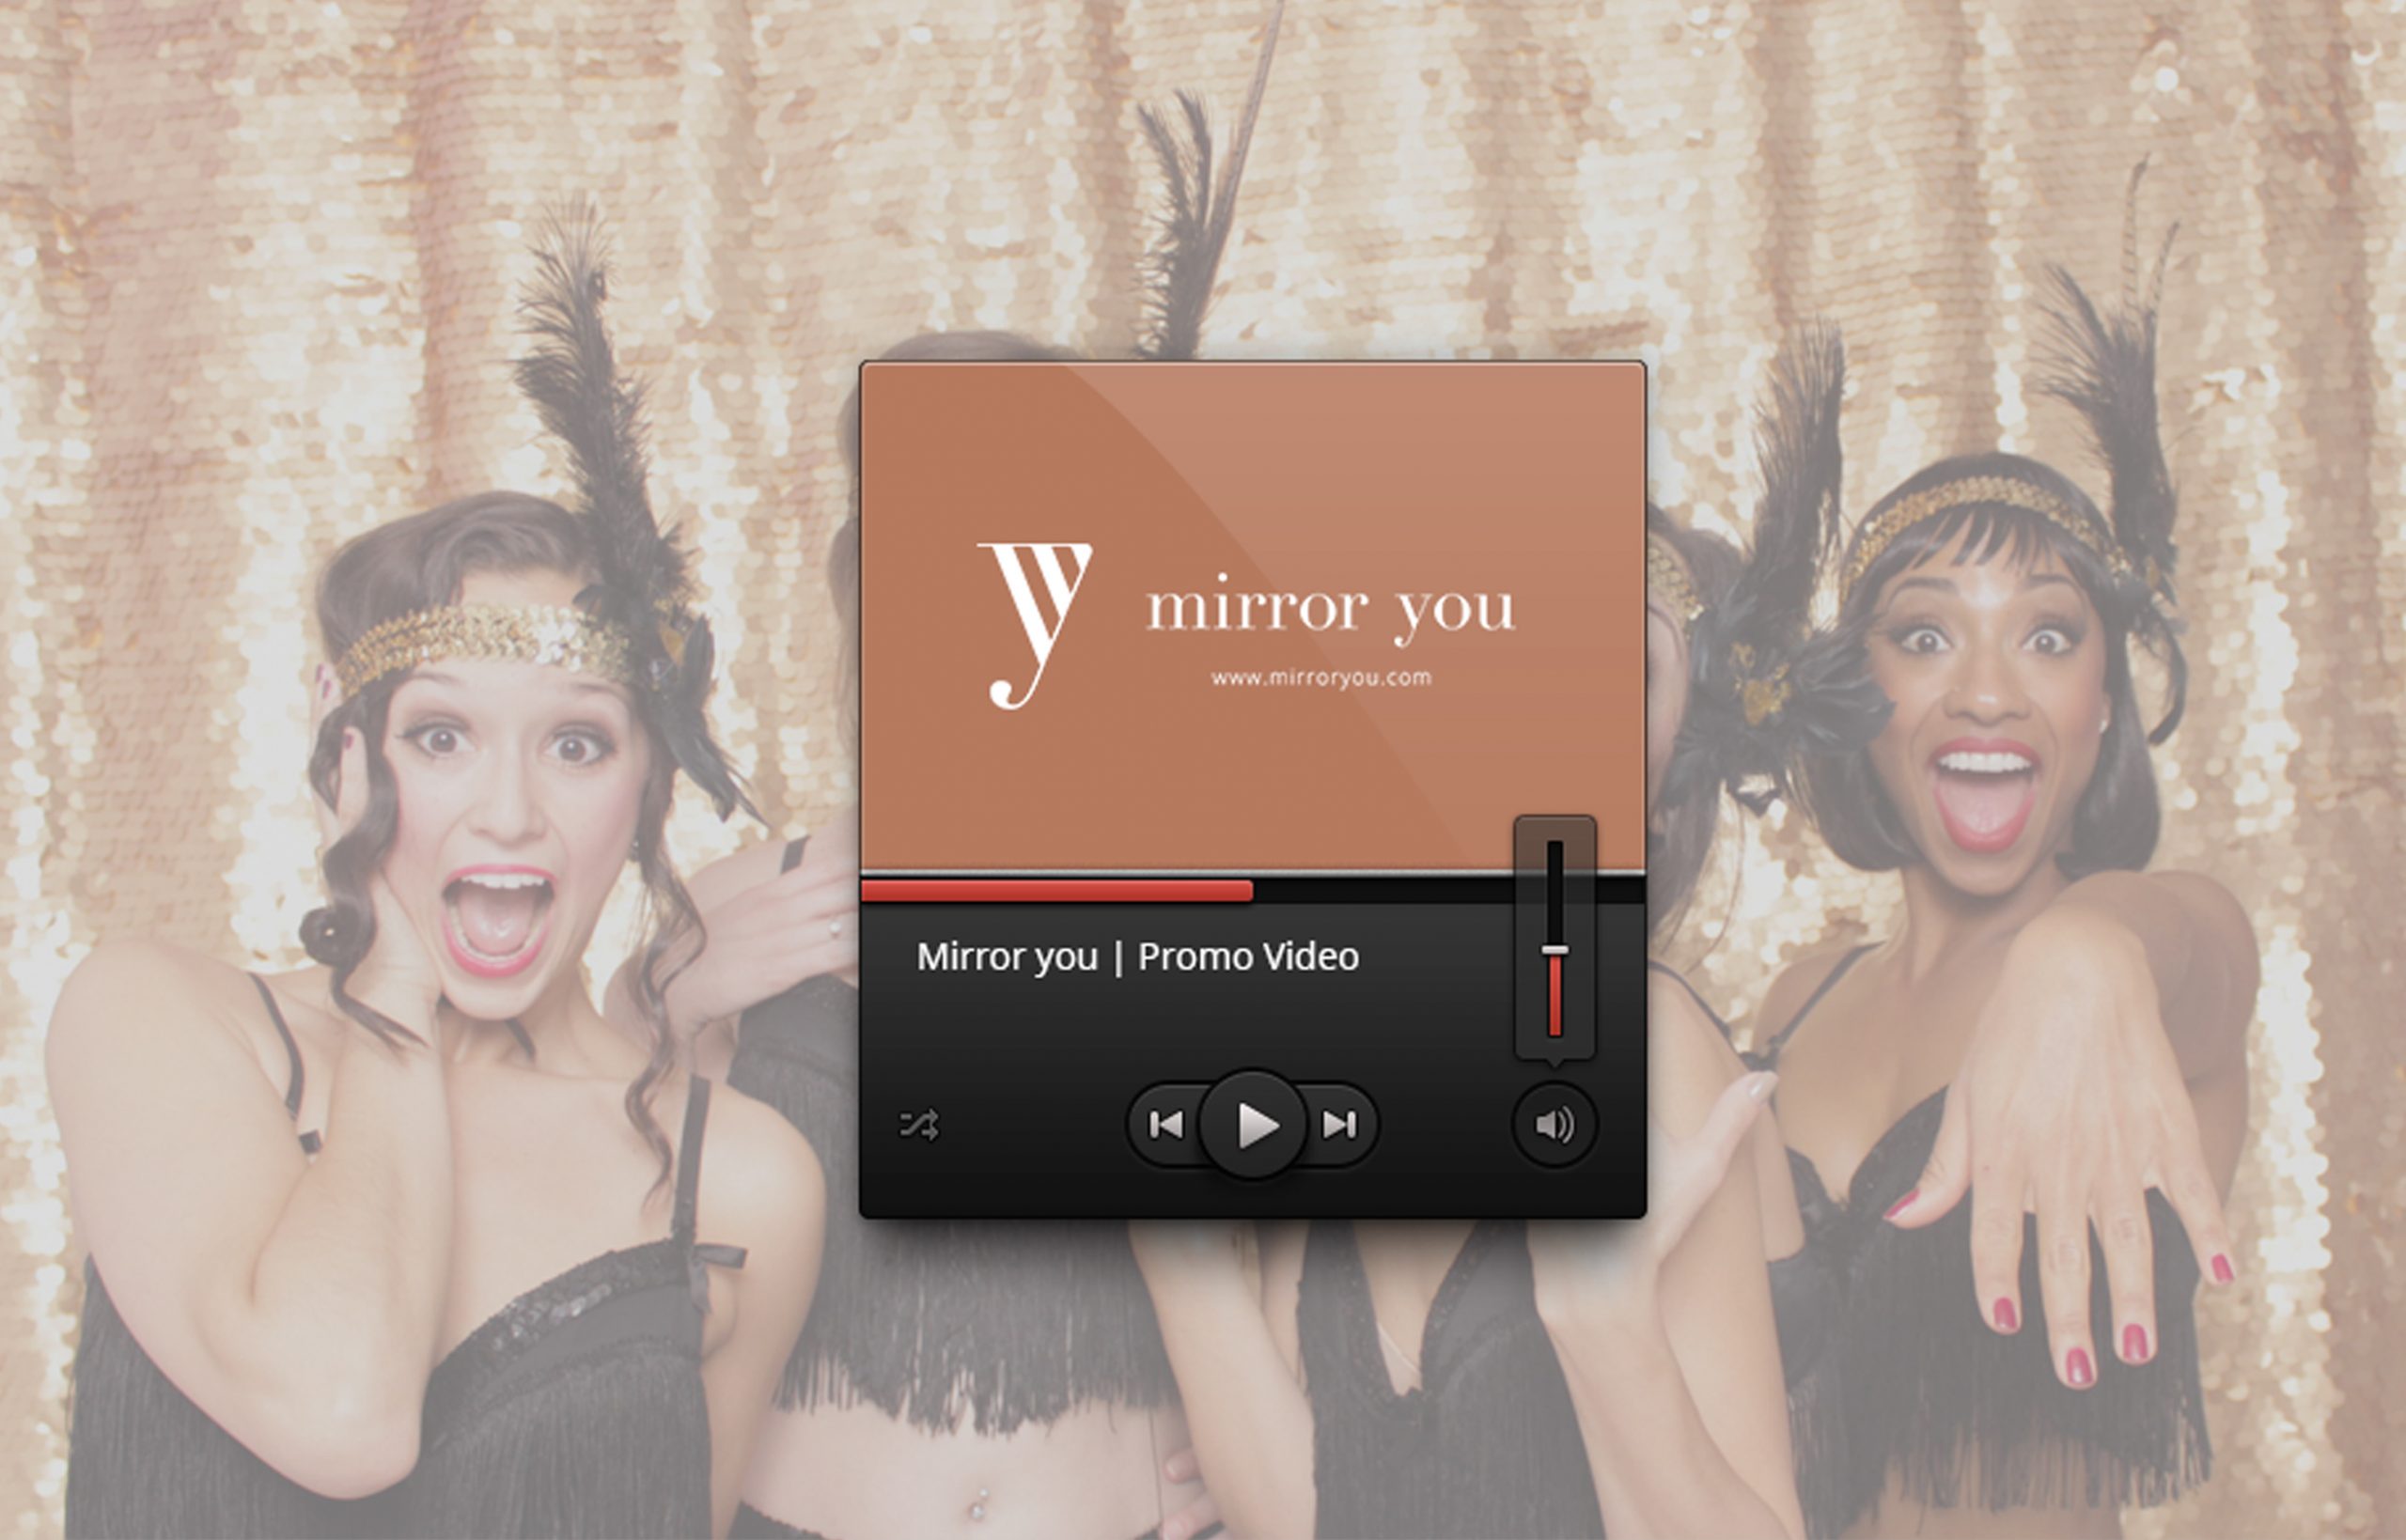 mirroryou4 scaled - Mirror You - The Design Boutique -mirroryou4 scaled